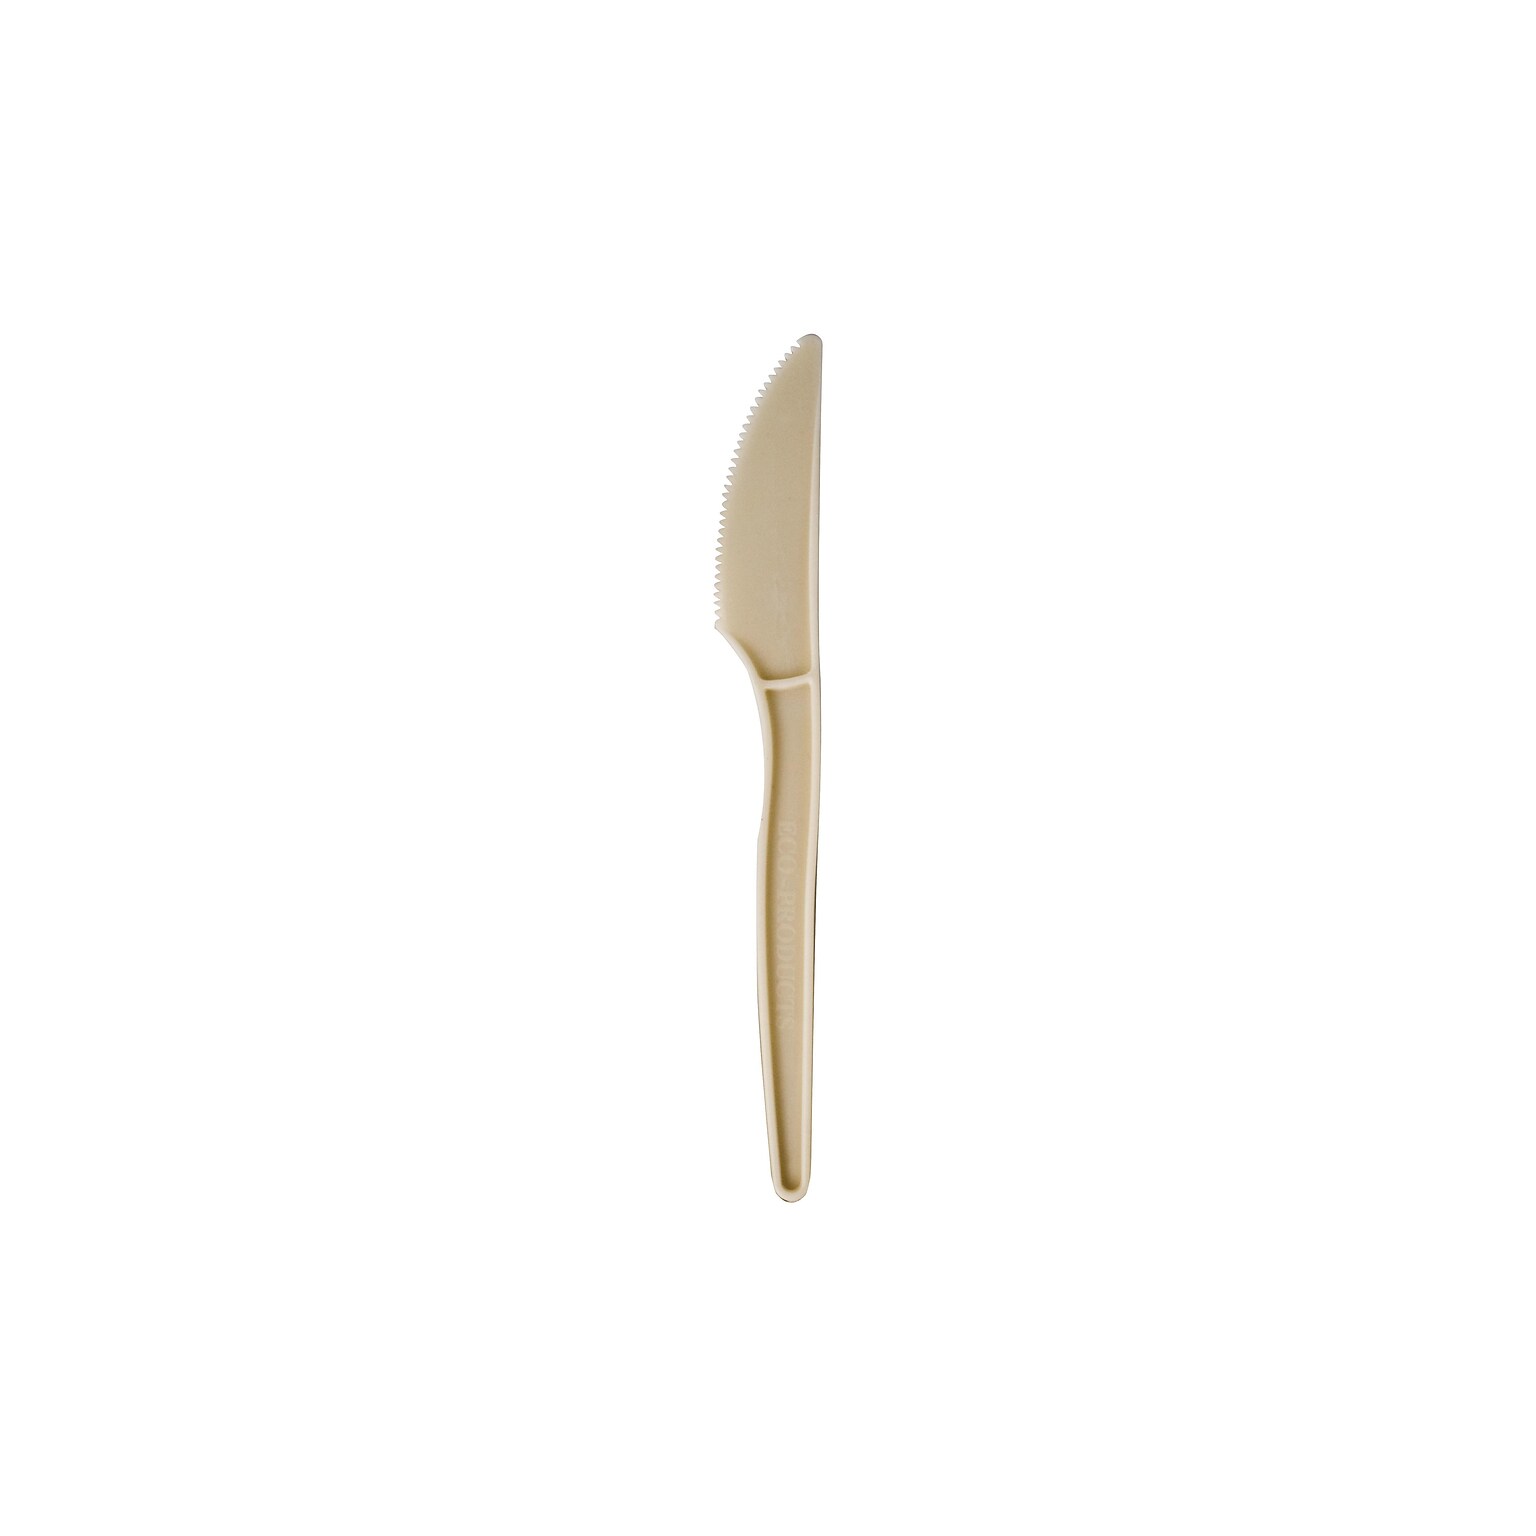 Eco-Products PSM Plant Starch Knife, Beige, 1000/Carton (EP-S001)